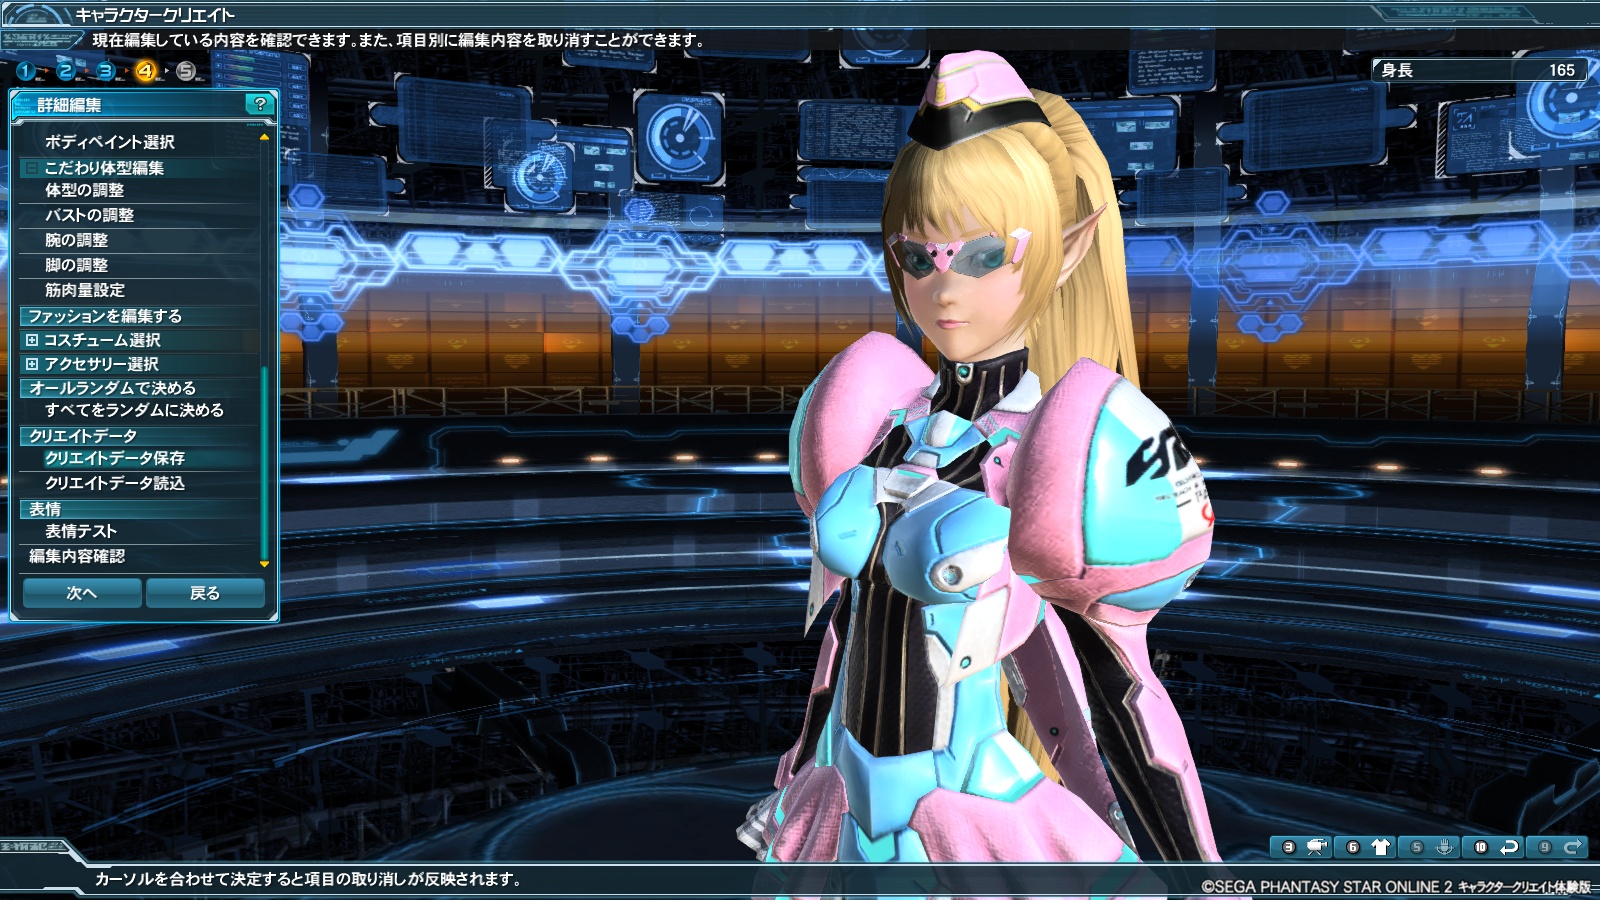 pso2 character creation info